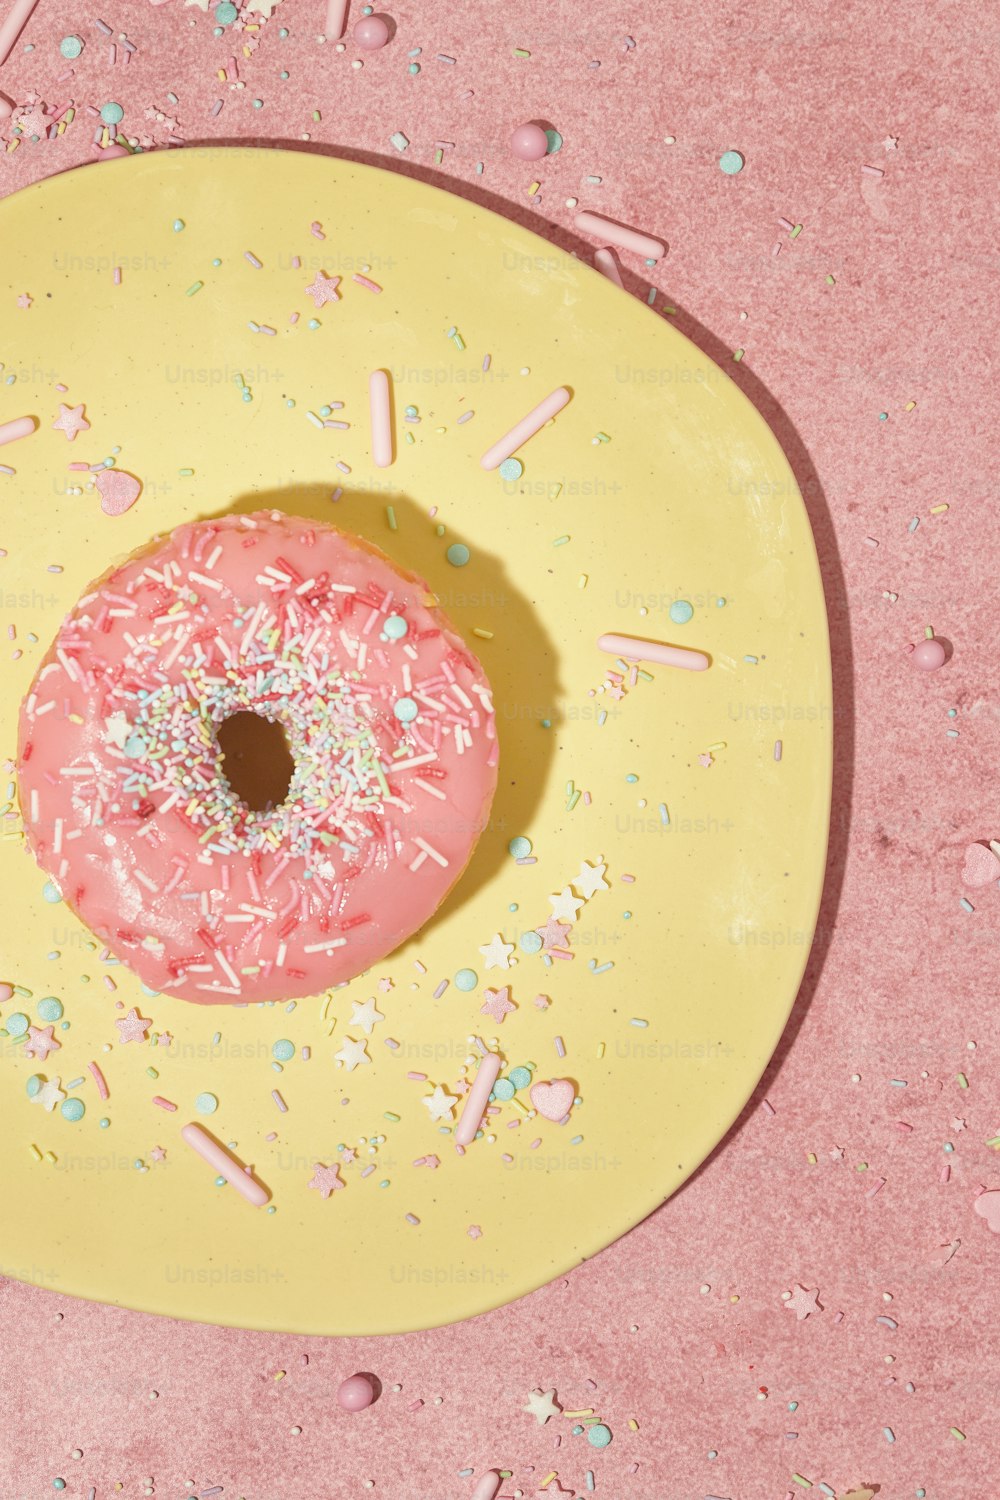 a pink frosted donut with sprinkles on a yellow plate